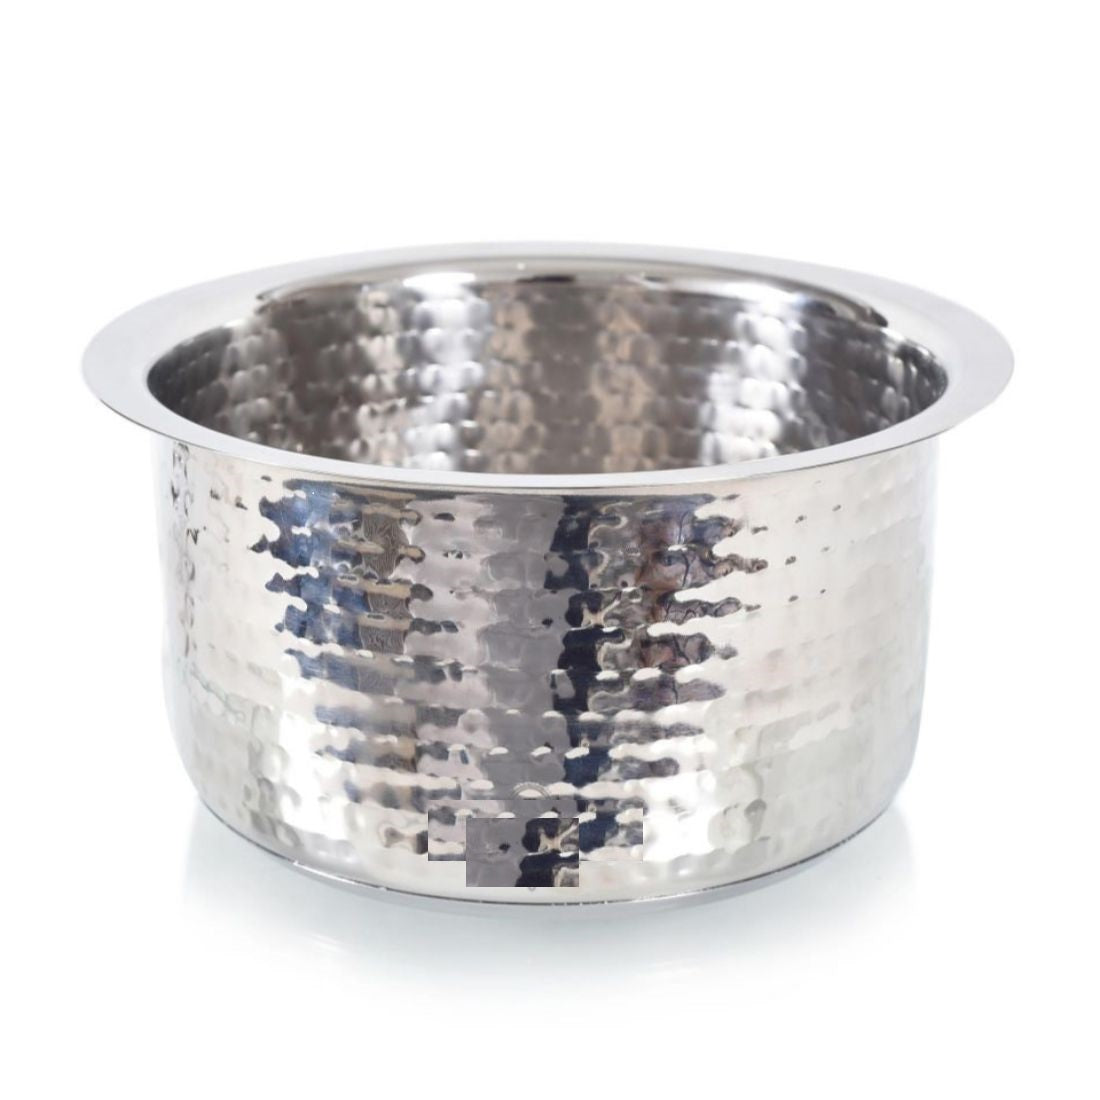 Aluminium Indian Hammered Deep Pot 4L with Lid No15 Round Heavy Duty 7865